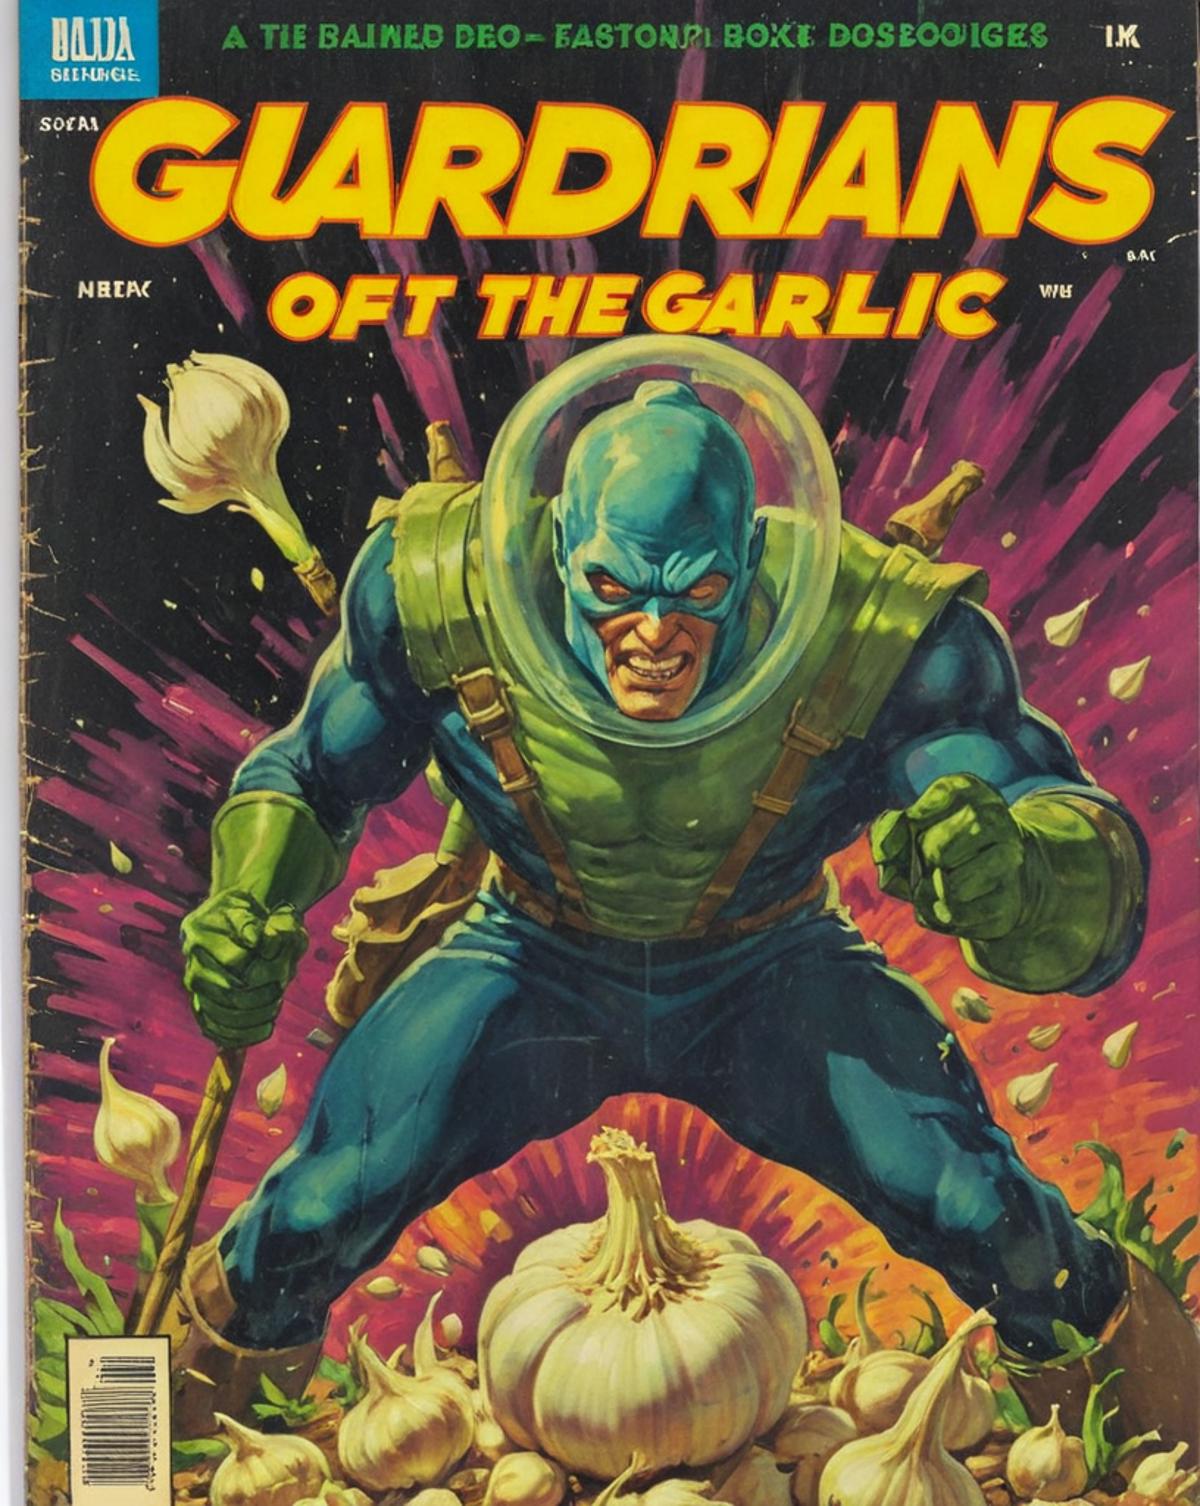 The Wizard's Vintage Comic Book Cover image by AdrarDependant